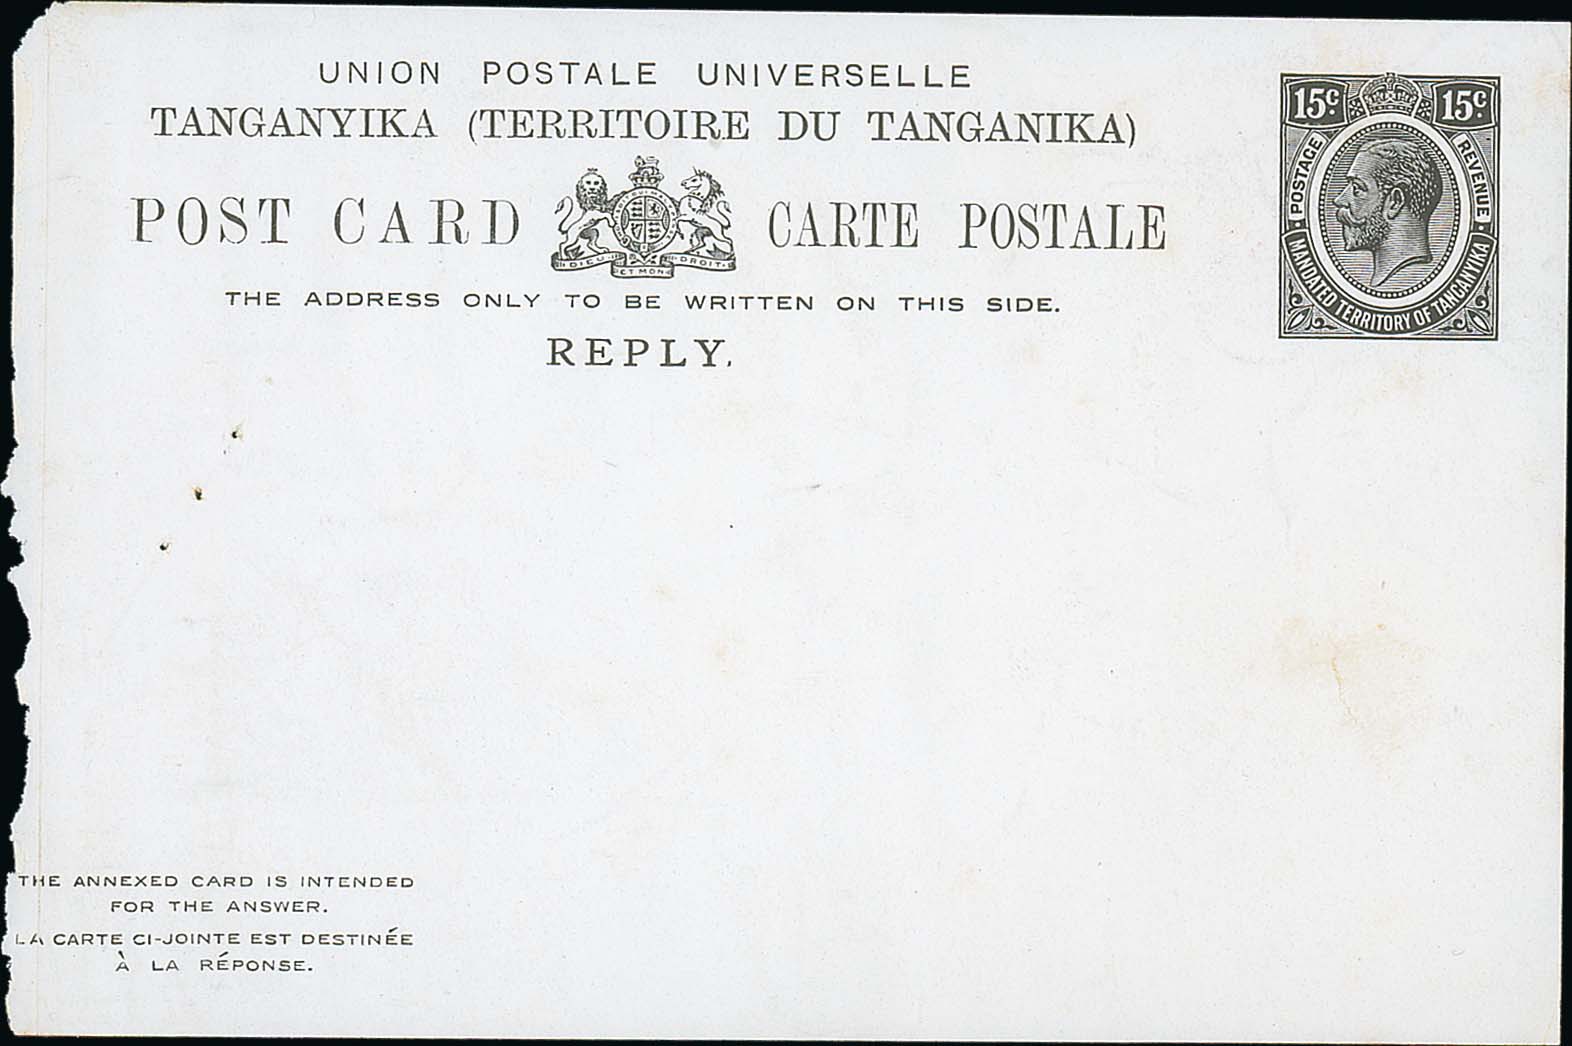 1926 15c Reply card, Die Proof of the reply half in the issued design, printed in black on white